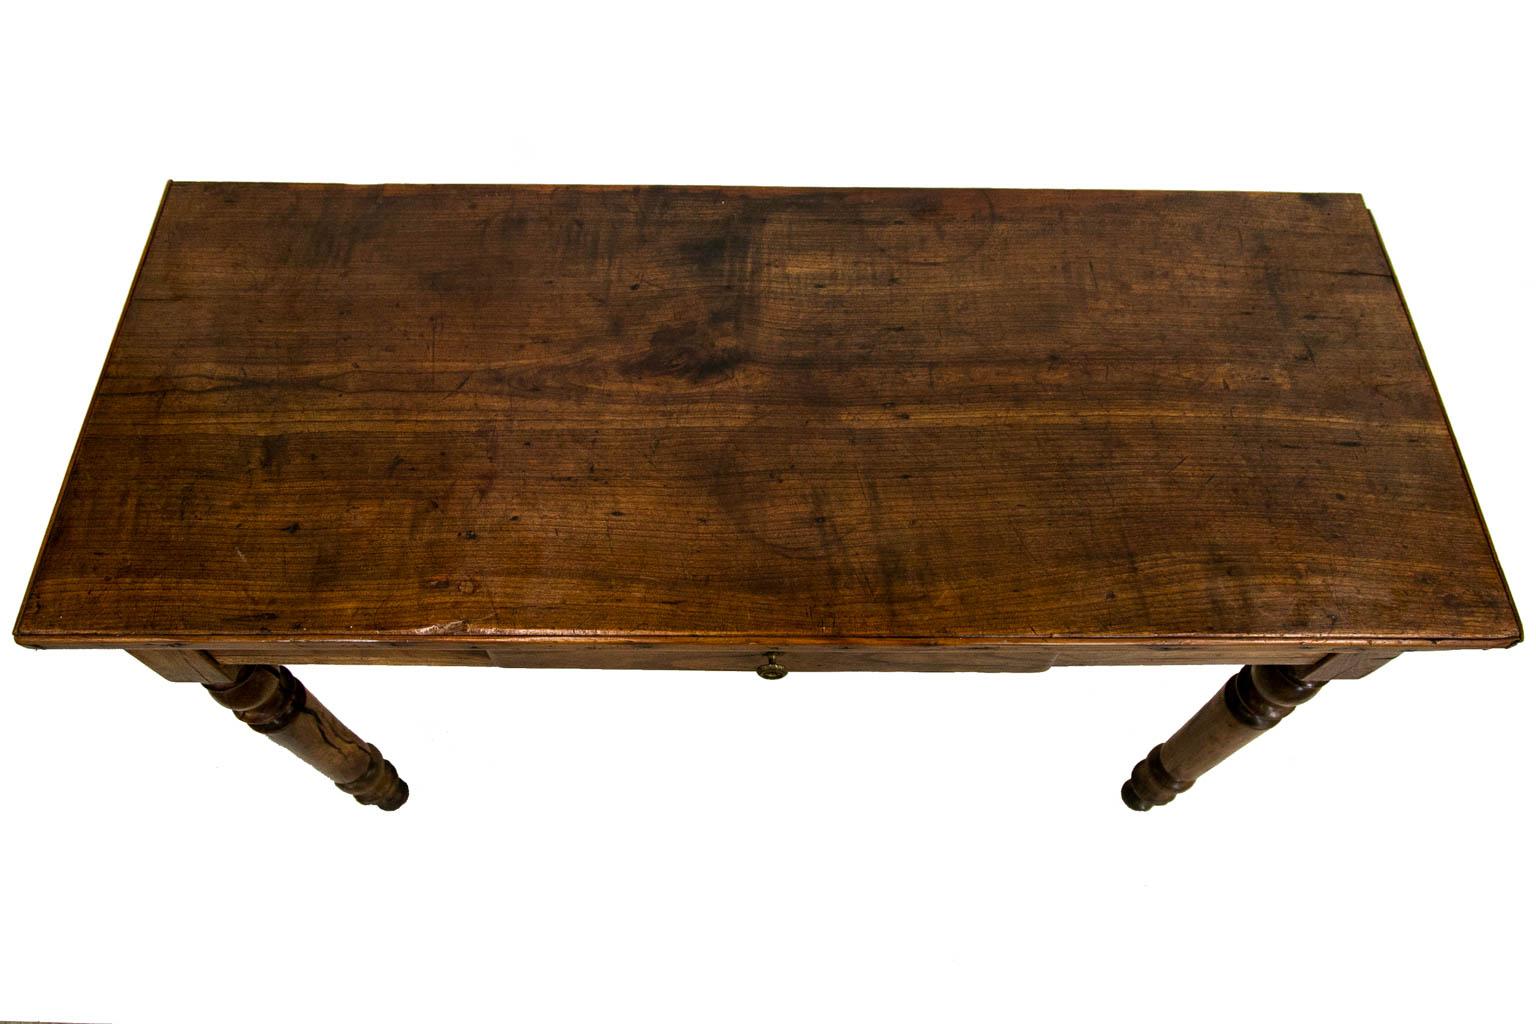 The top of this console table has applied molding on three sides. The top patina has blemishes commensurate with use and age. The drawer bottom and sides have been trimmed at the back.